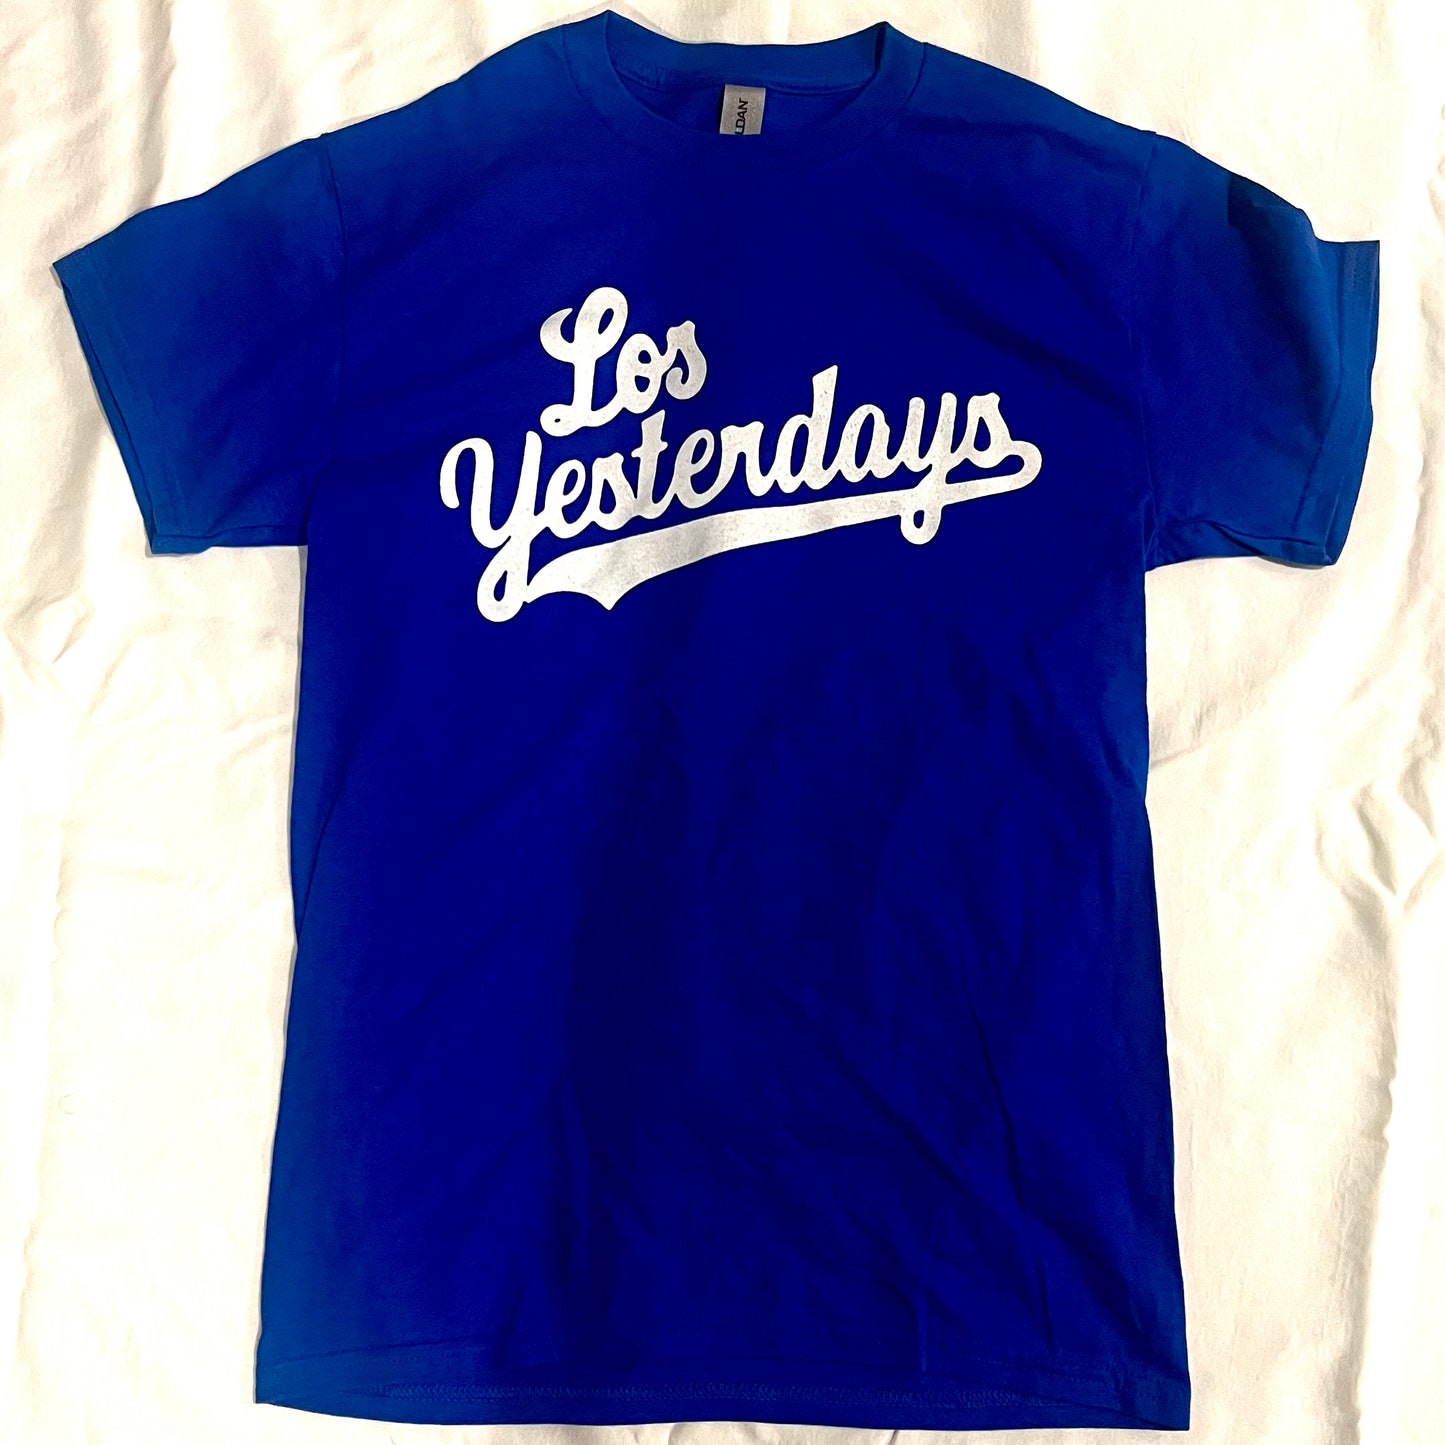 Los Yesterdays Dodgers Tribute Shirt